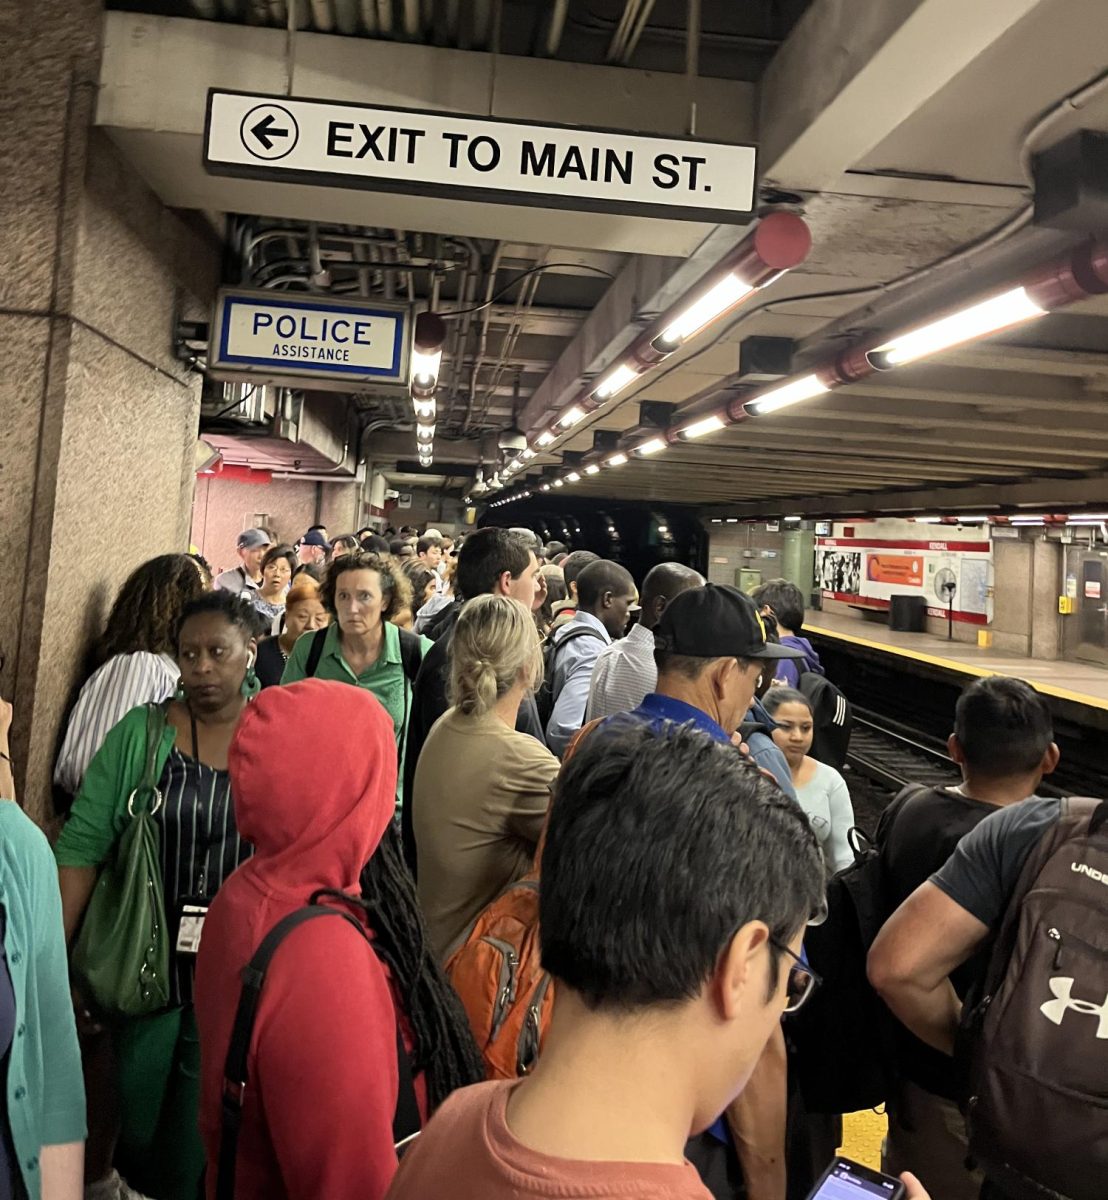 A crowded North Station stop in Boston as many commuters wait for the commuter rail.